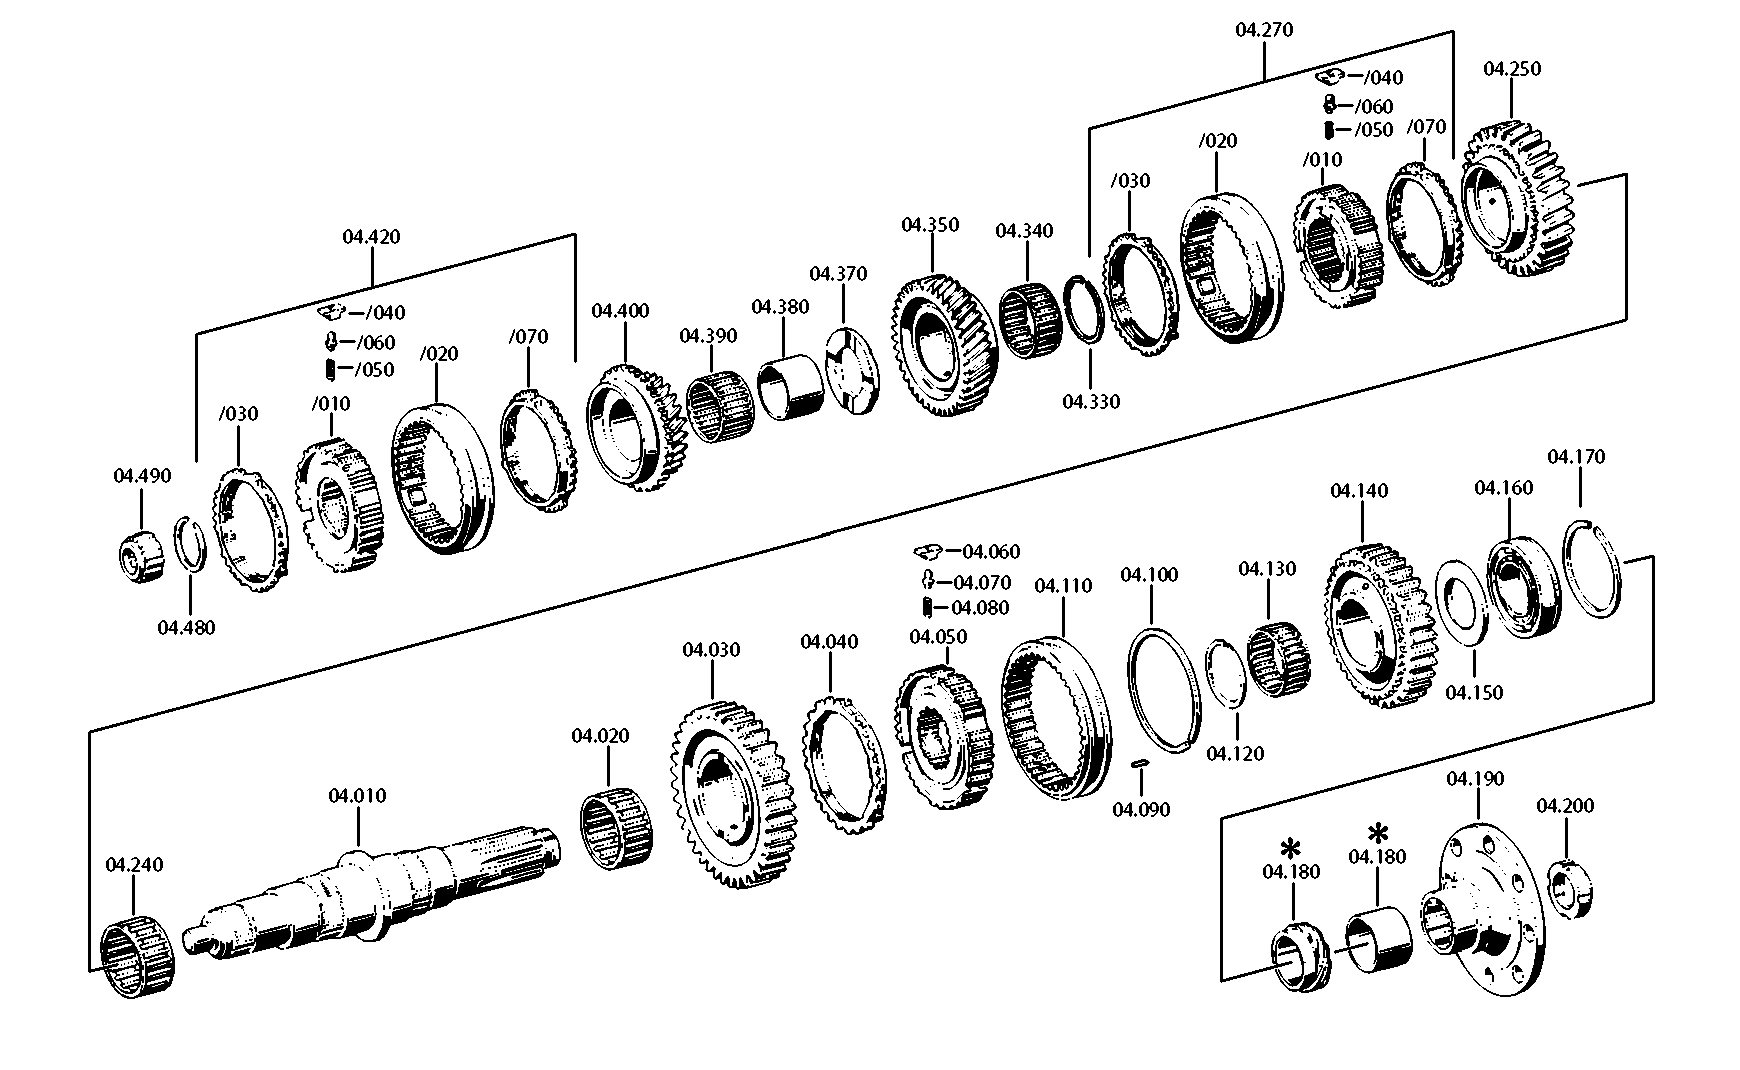 drawing for SKF 170743 - NEEDLE CAGE (figure 3)